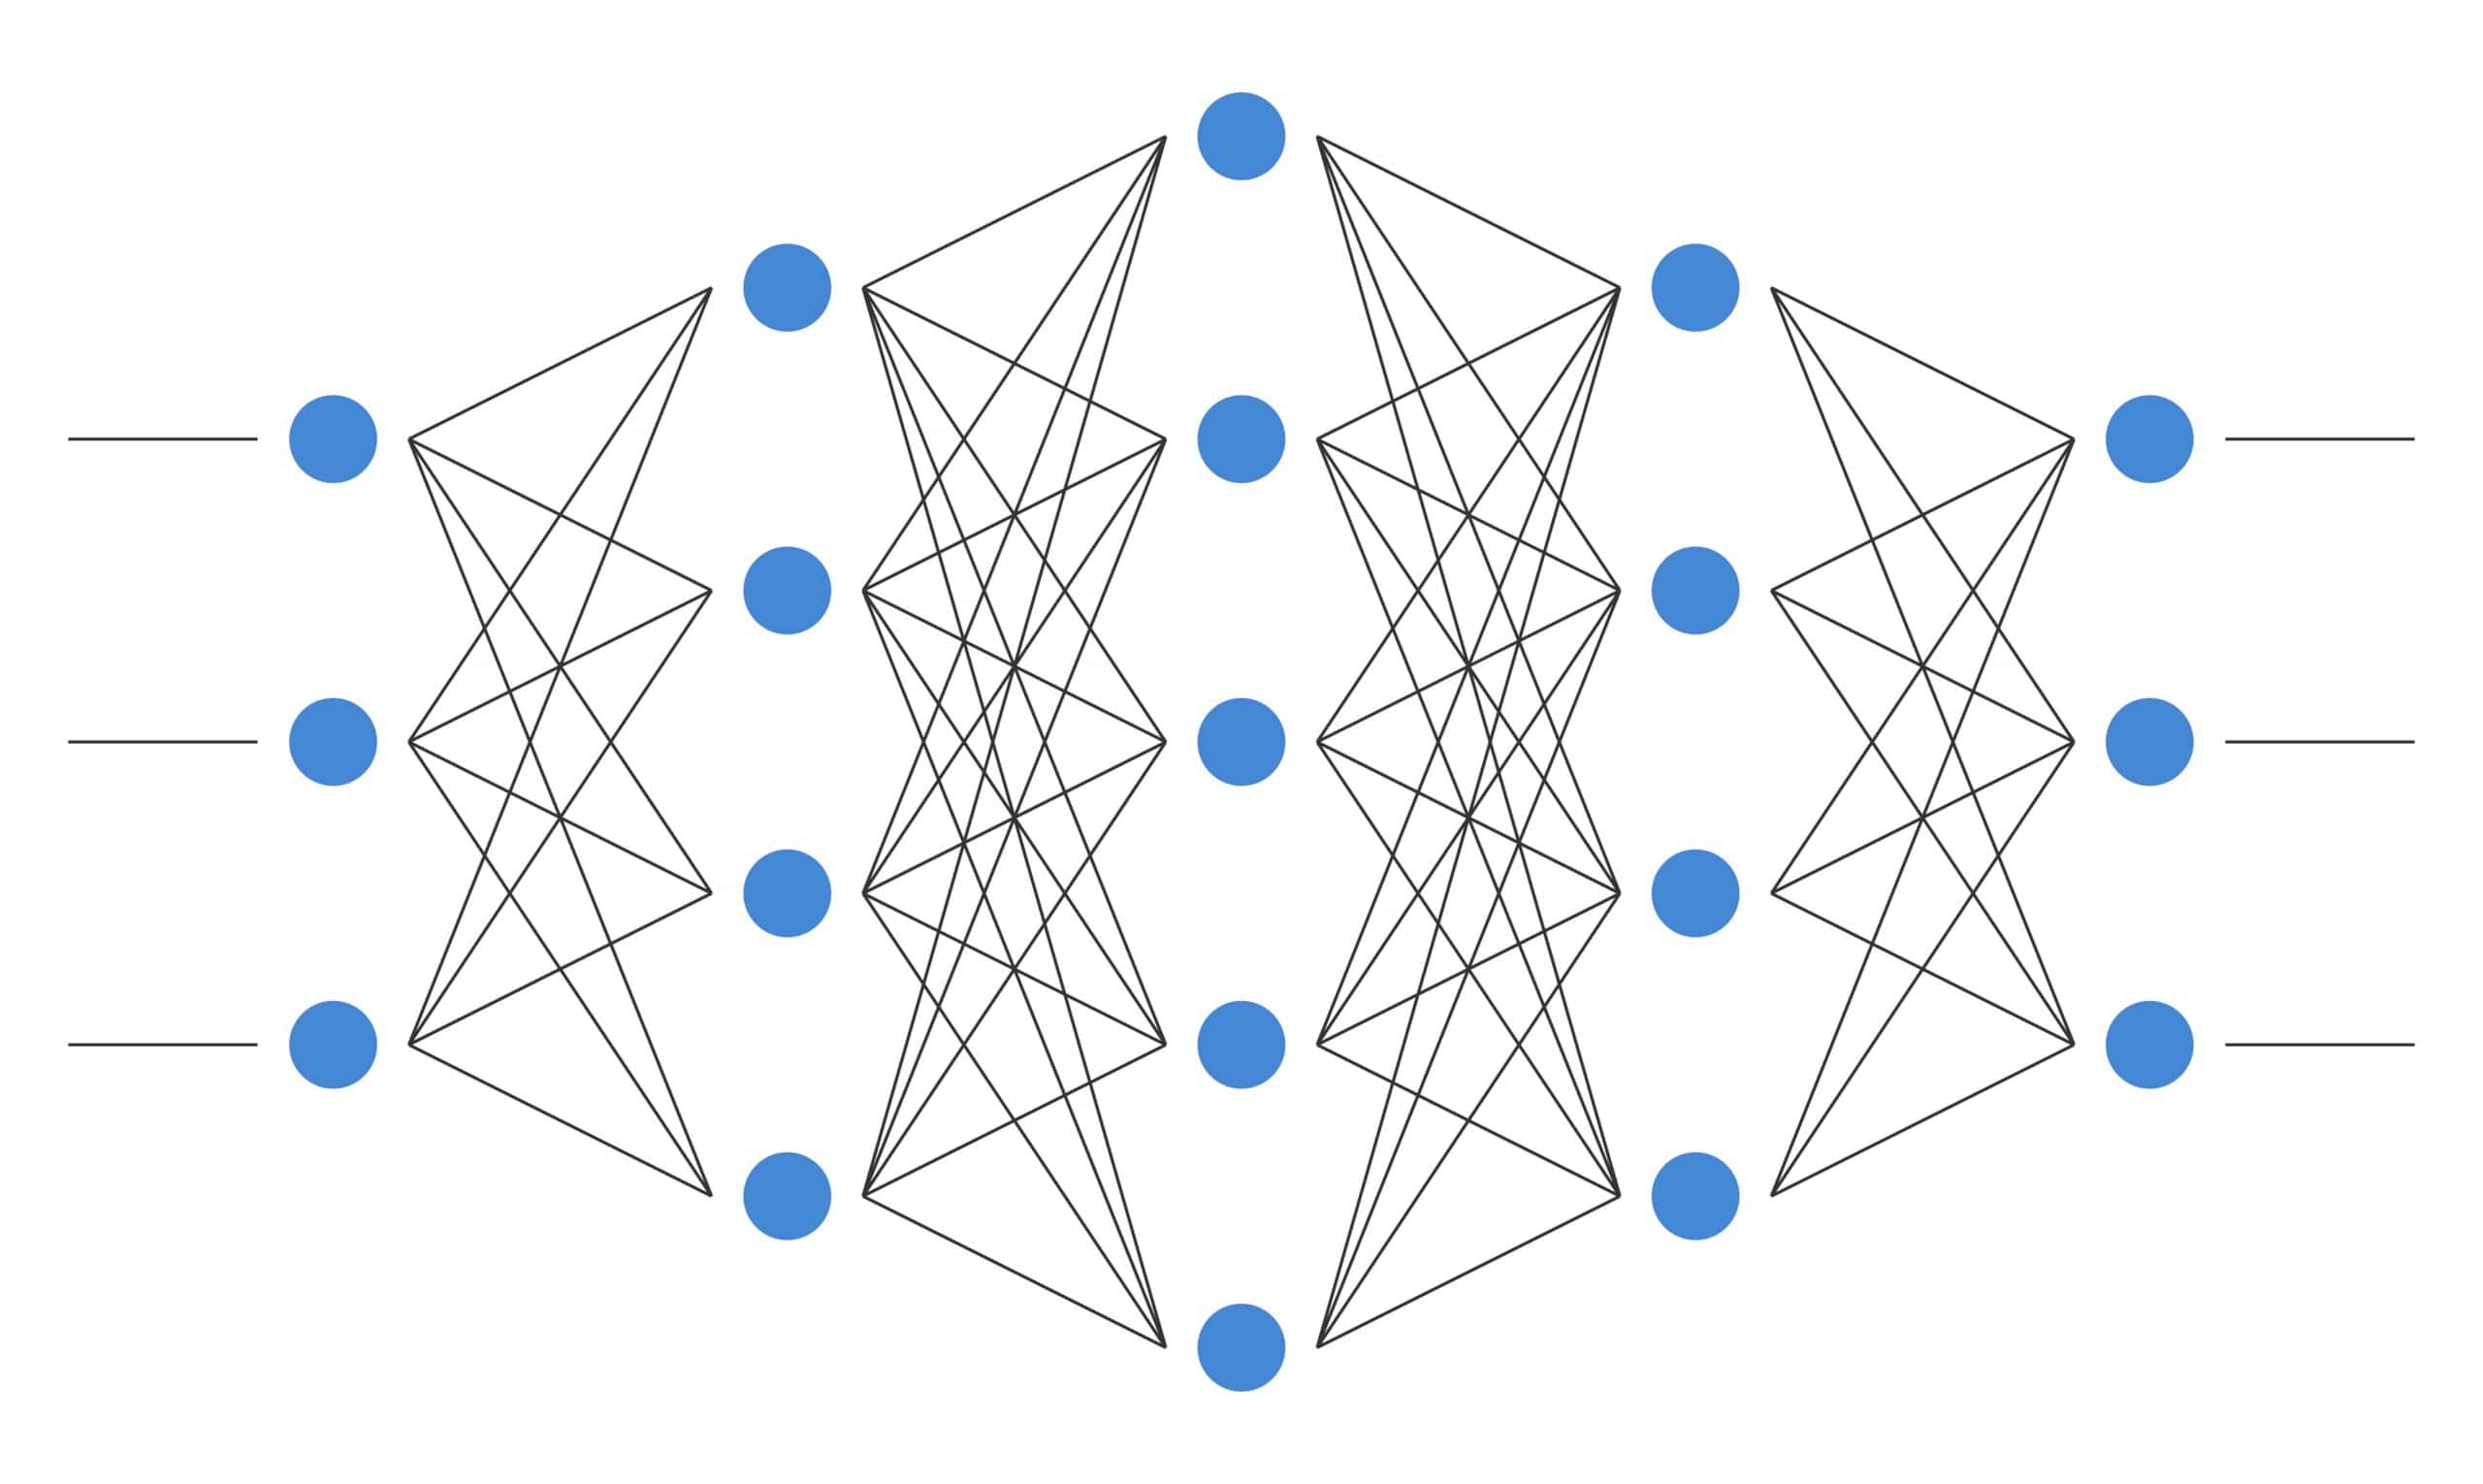 A graphic representing neural connections similar to those in artificial intelligence (AI) software